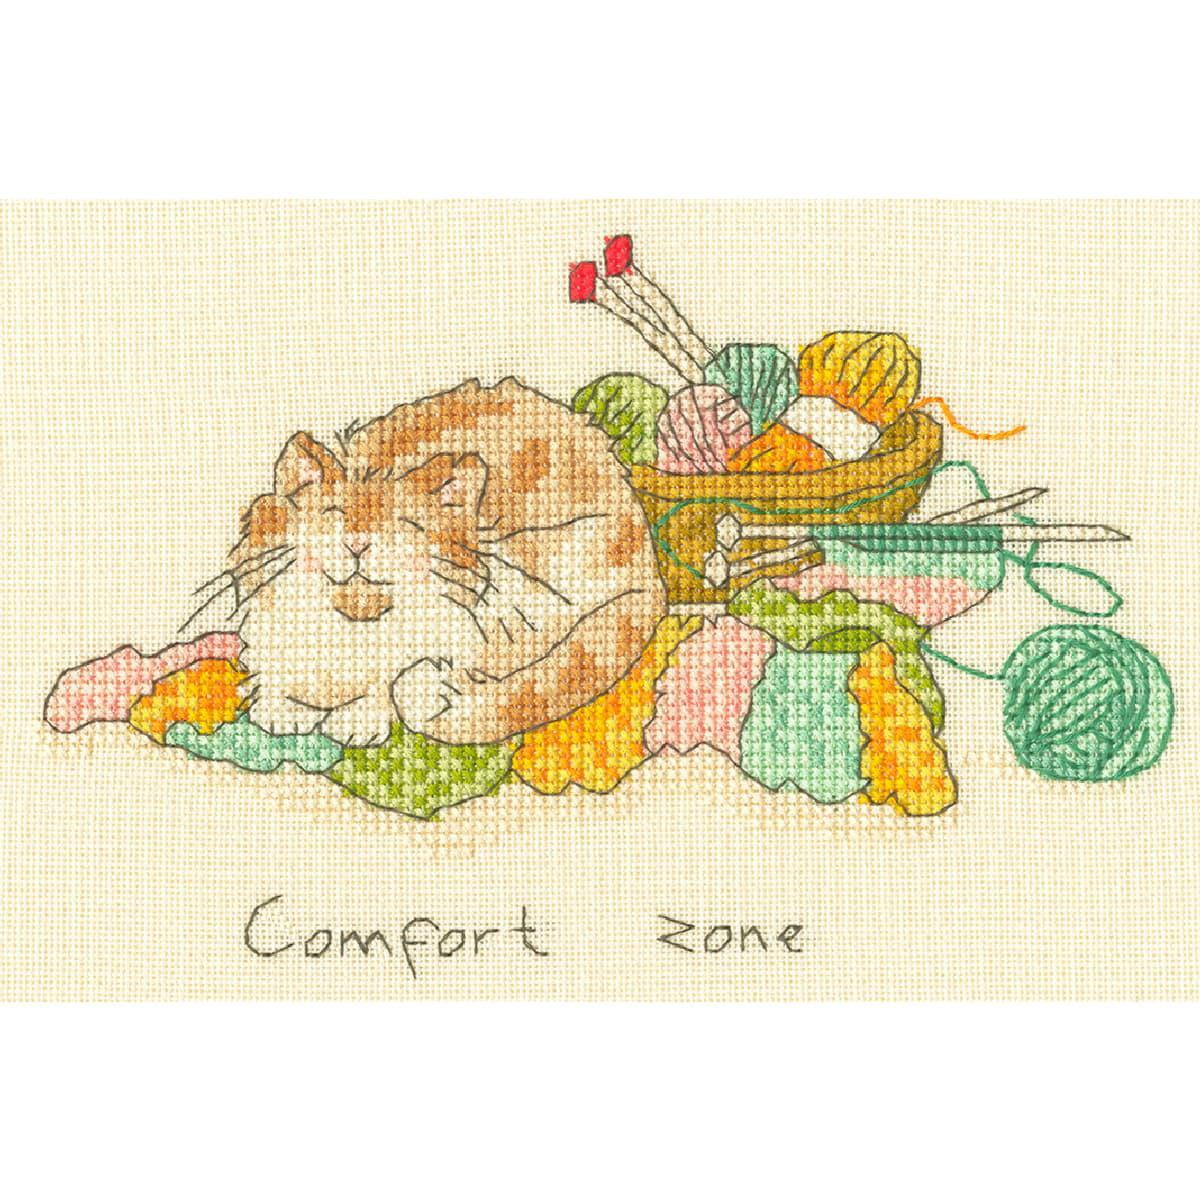 A cross-stitch picture shows a contented, fluffy orange...